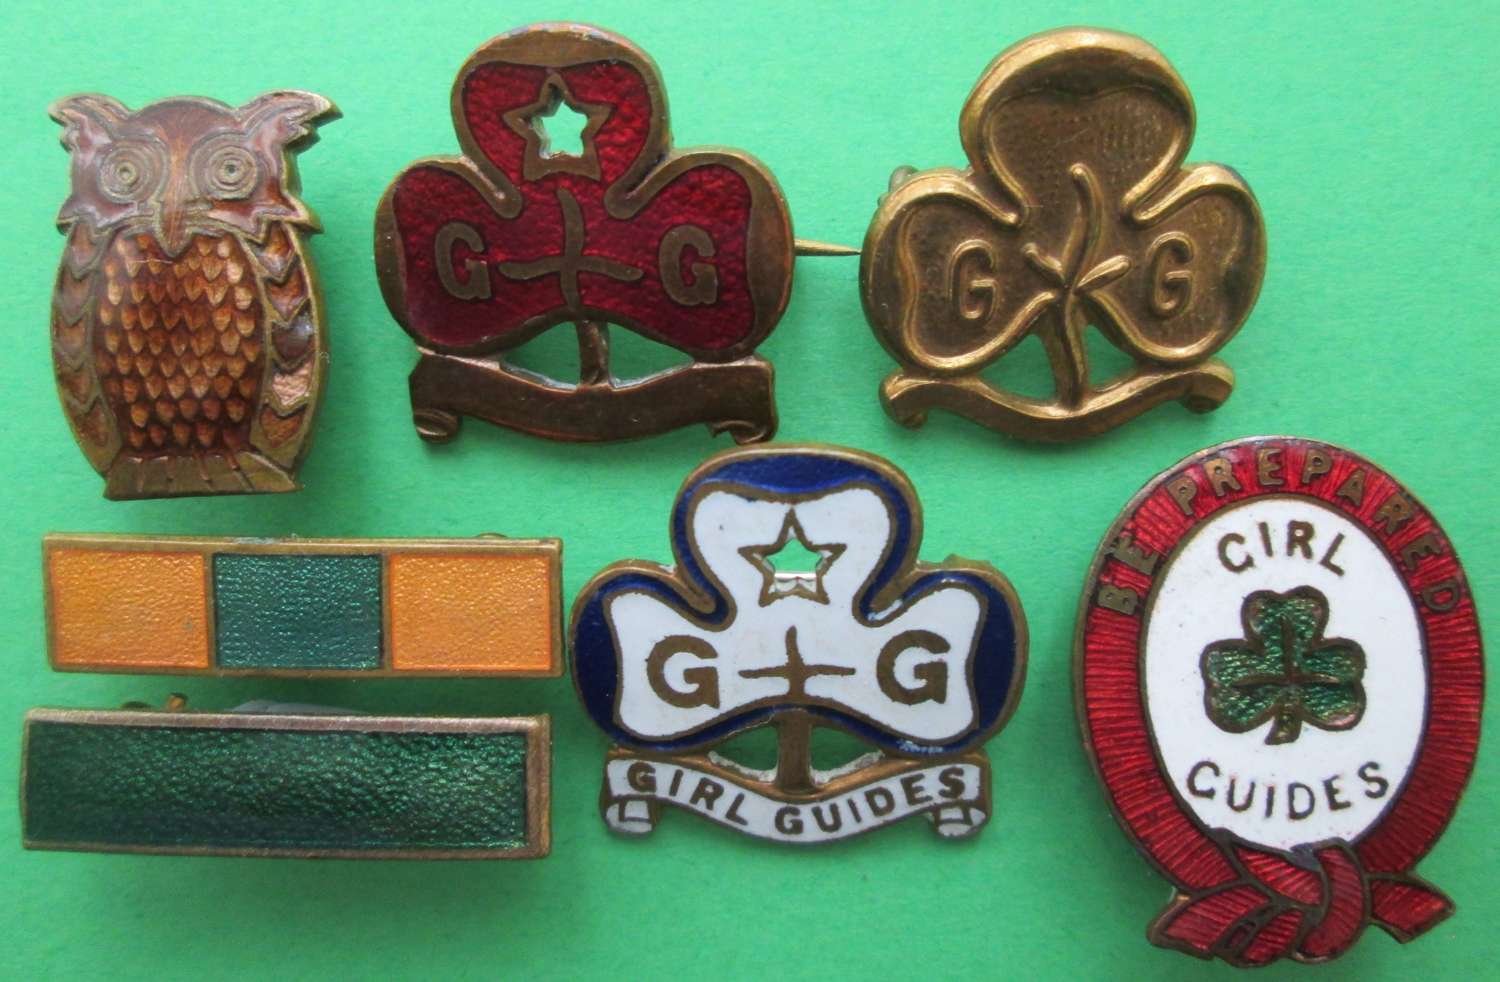 A COLLECTION OF GUIDE BADGES